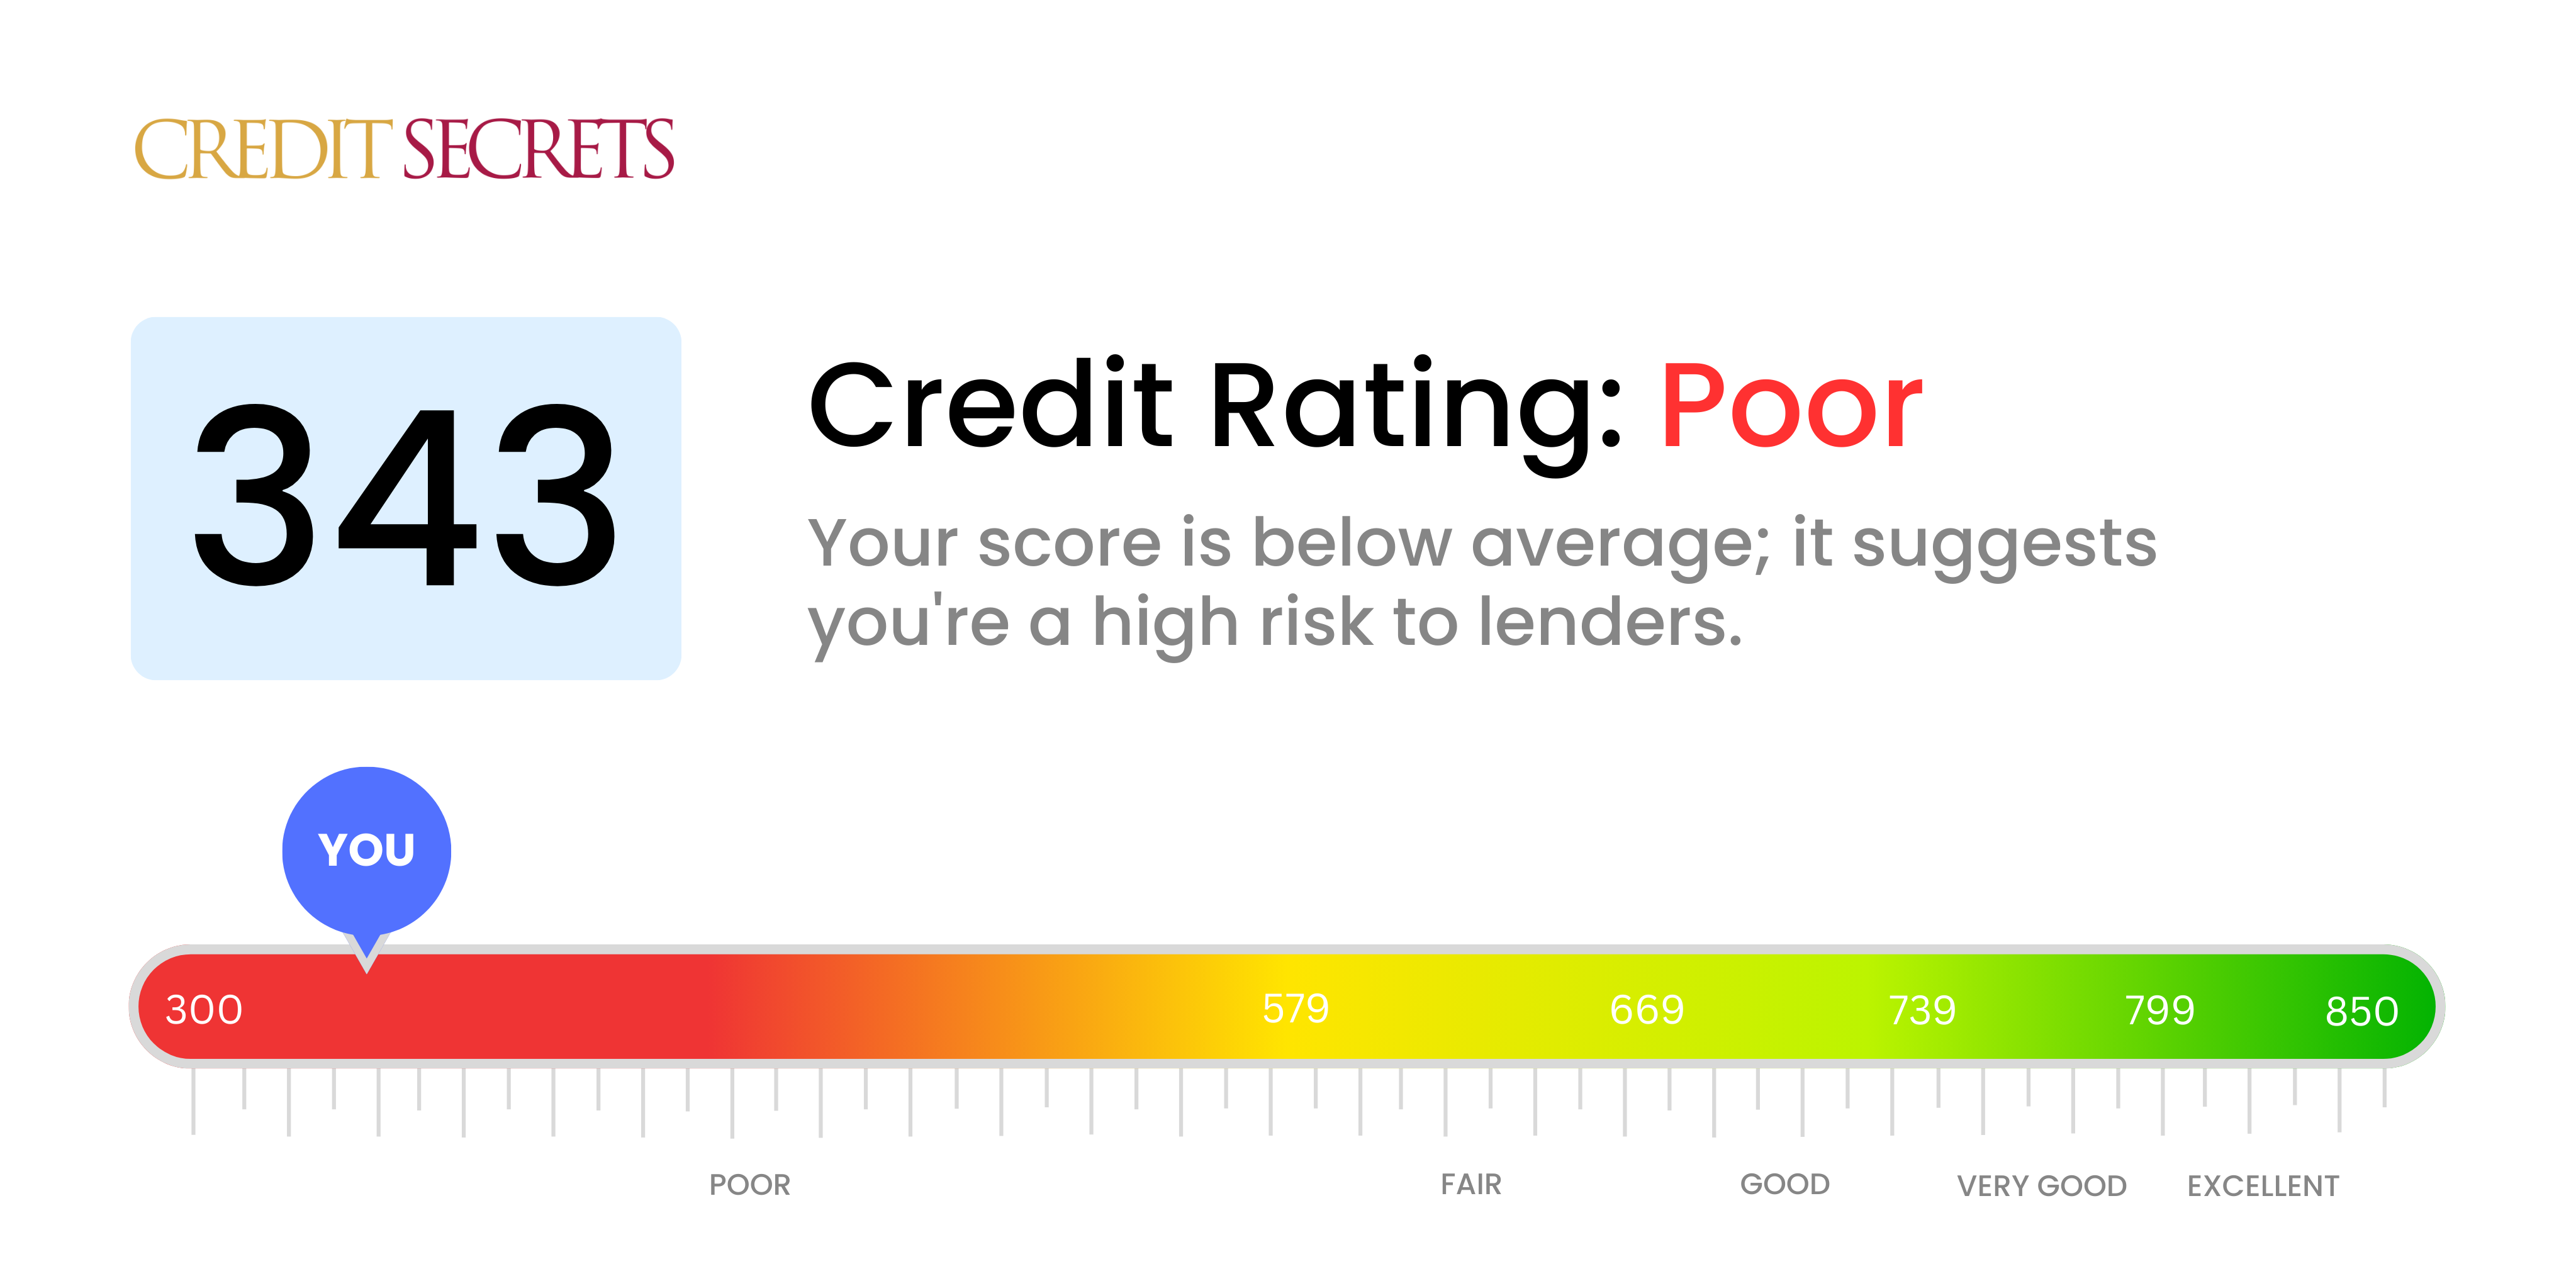 Is 343 a good credit score?